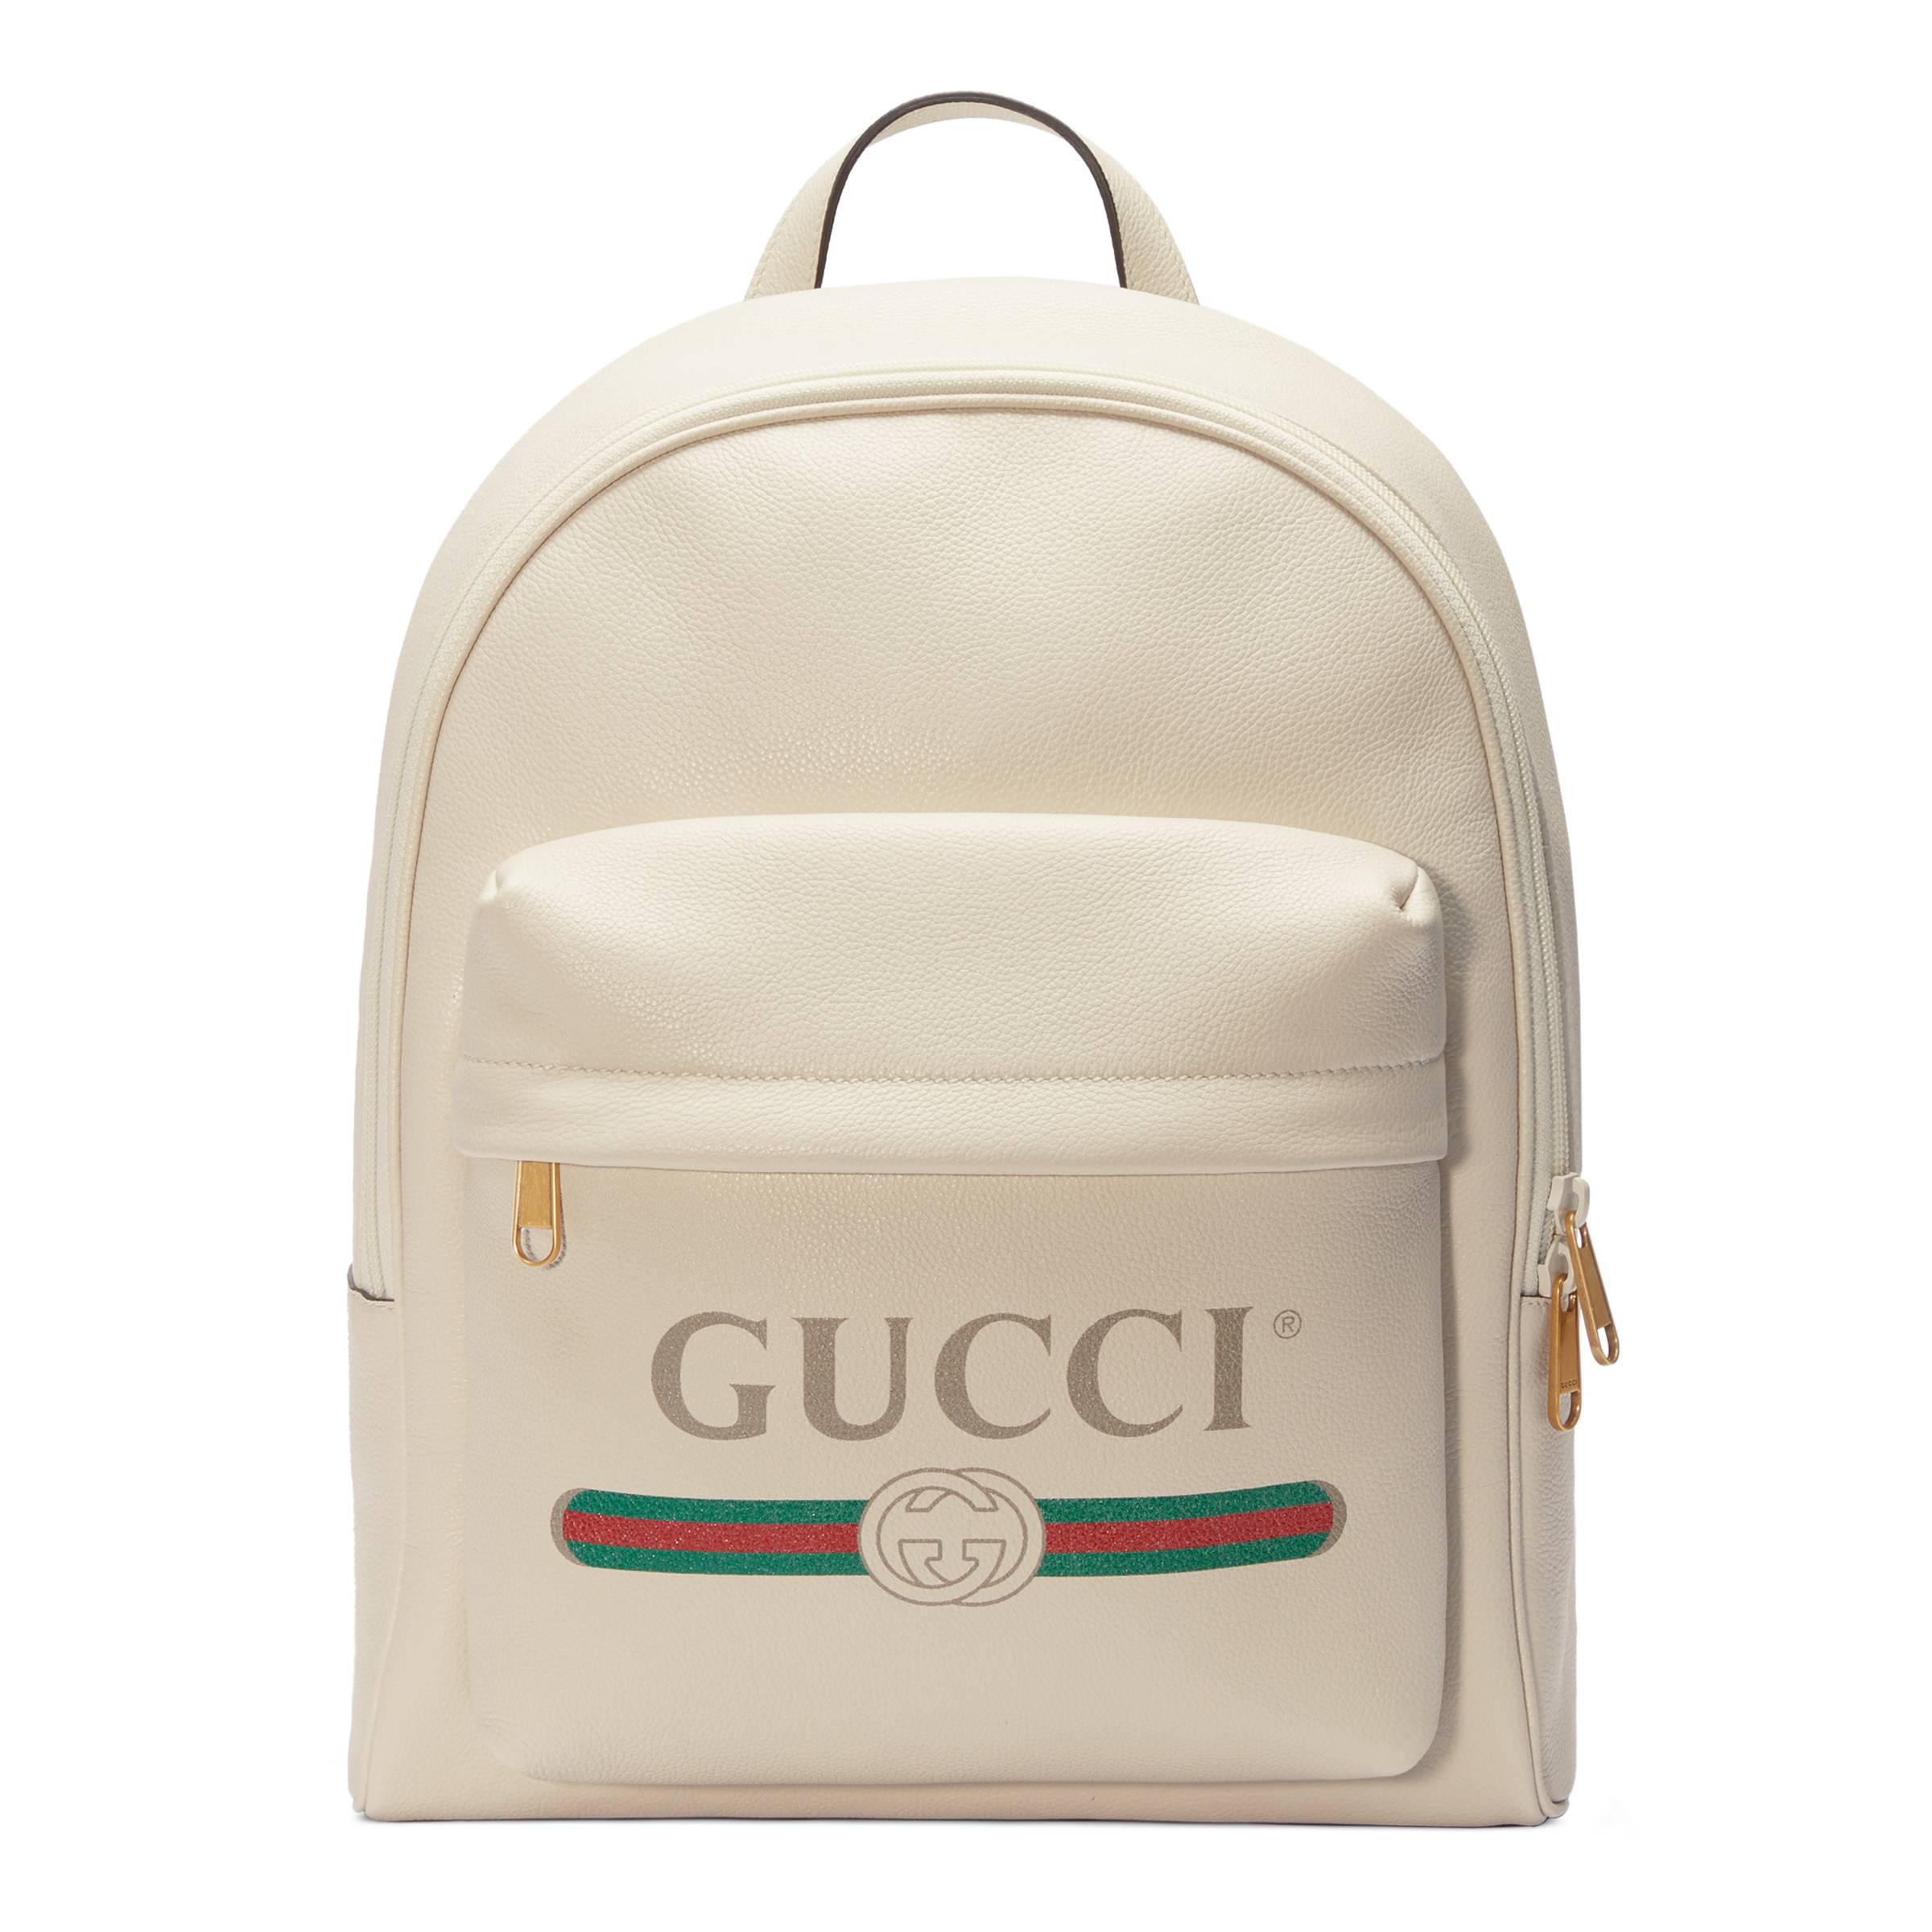 Tag fat angre Afvise Gucci Print Leather Backpack in White - Lyst